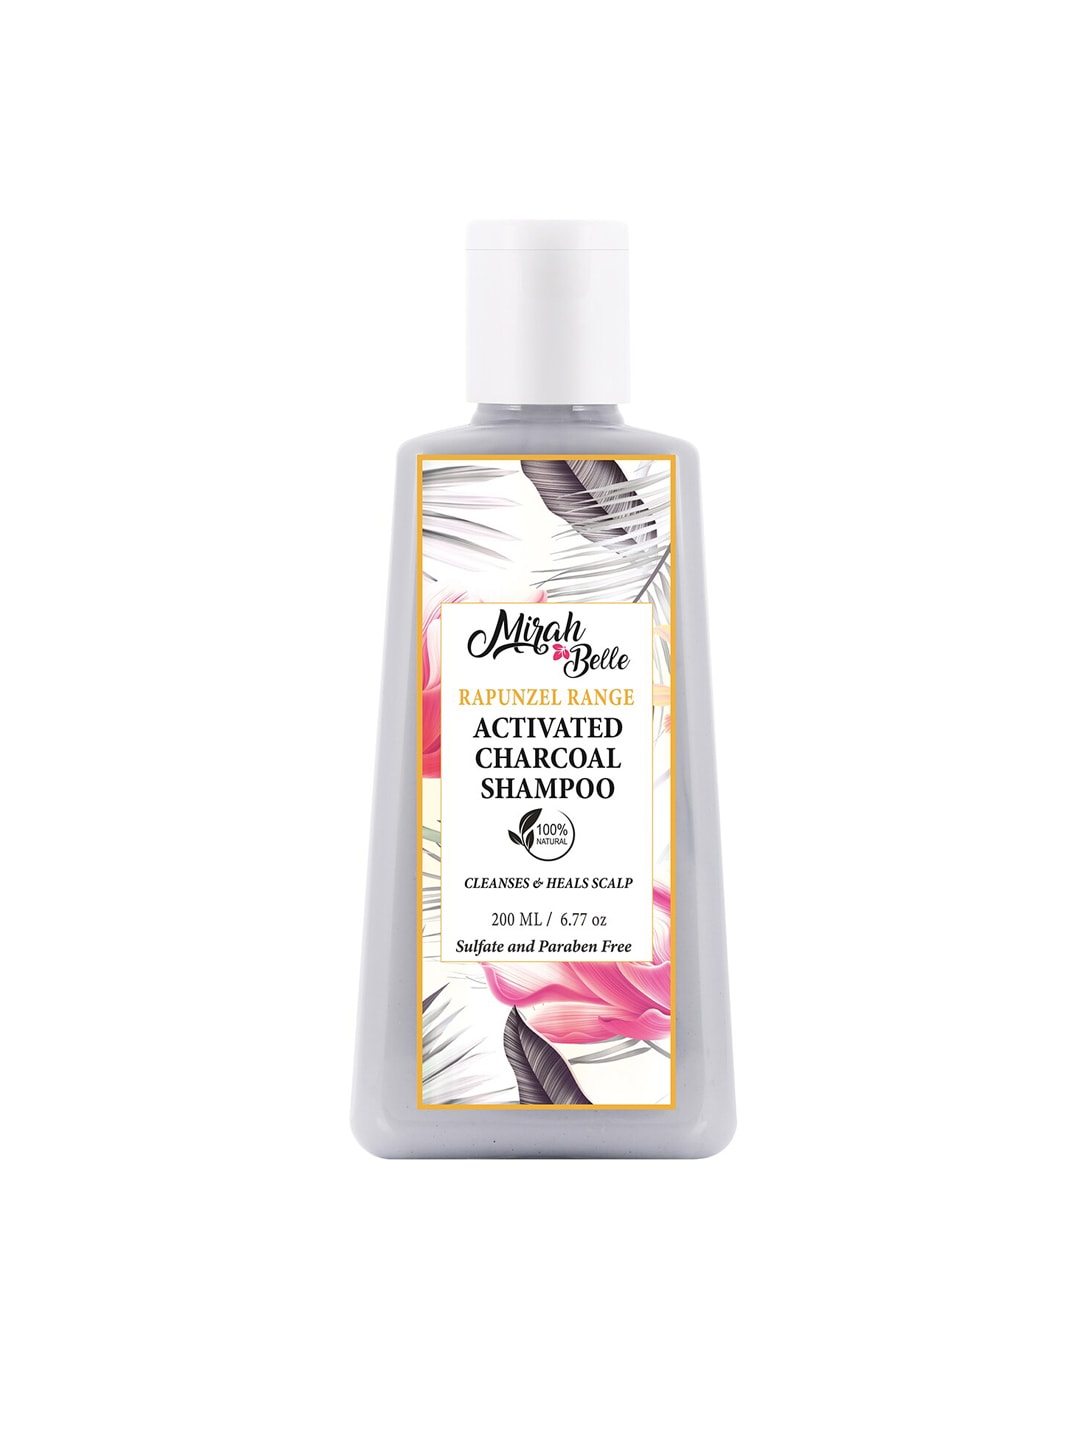 Mirah Belle Activated Charcoal Shampoo 200 ml Price in India